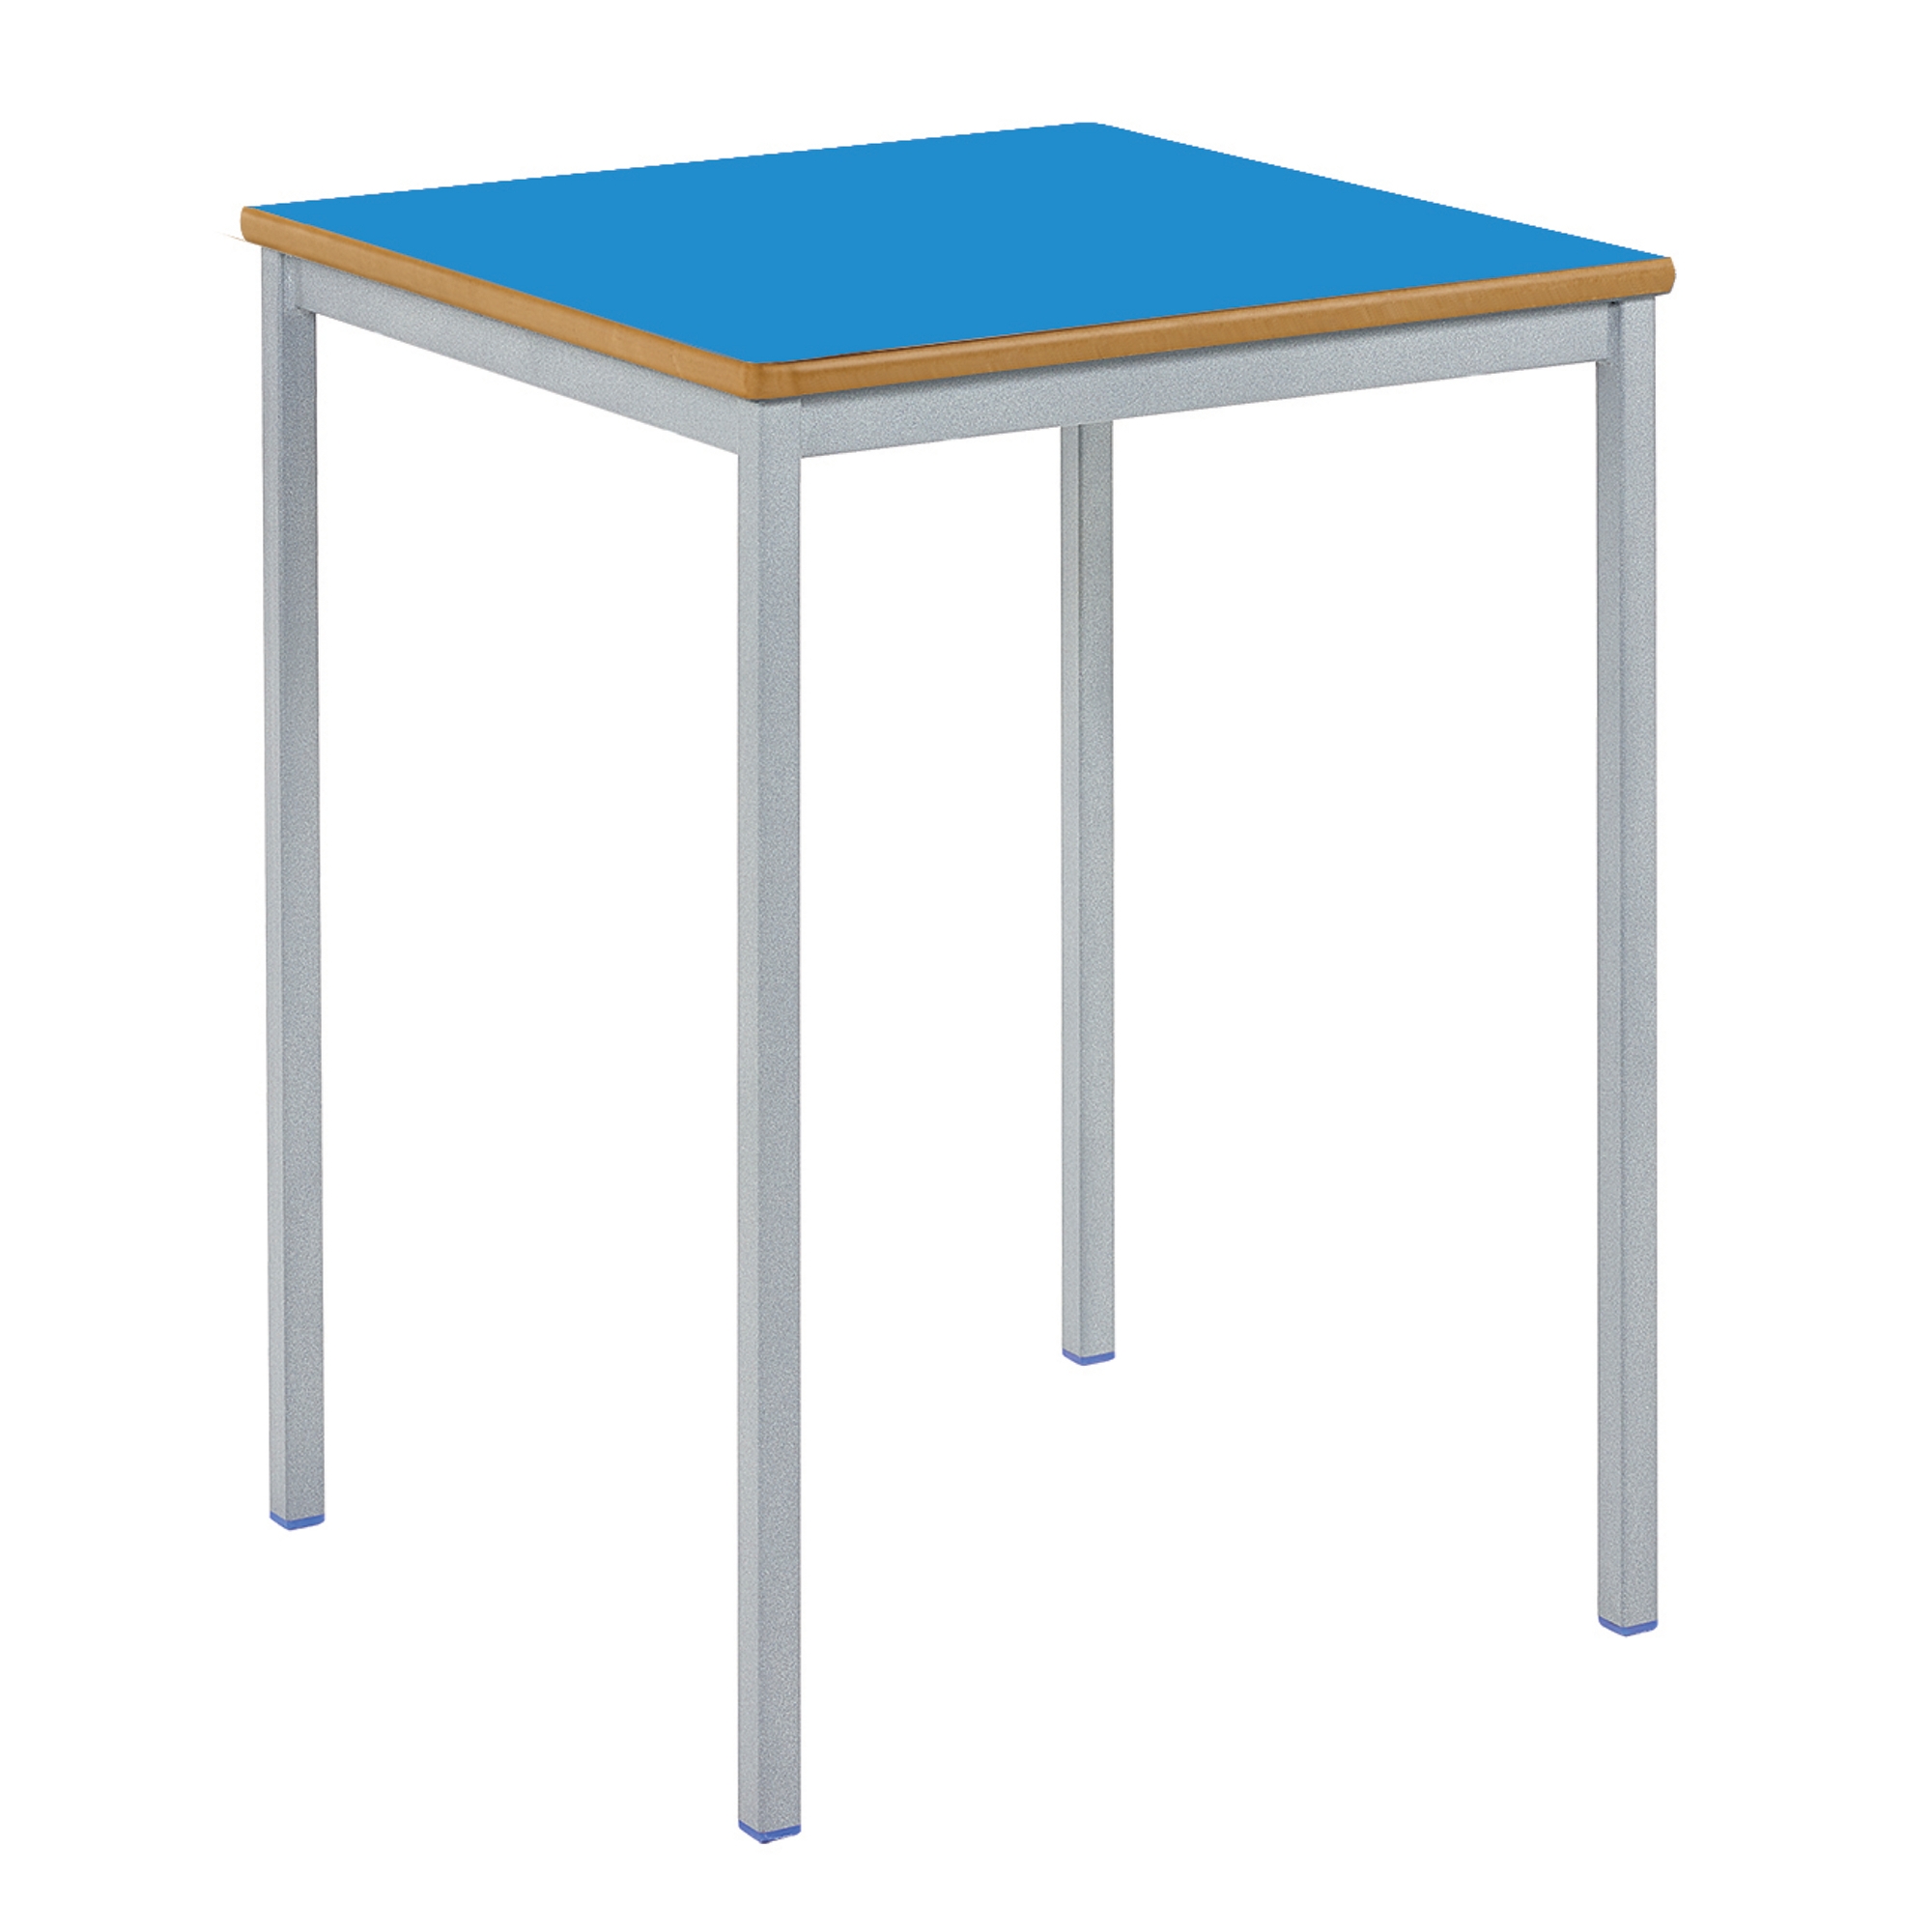 Classmates Square Fully Welded Classroom Table - 600 x 600 x 460mm - Blue